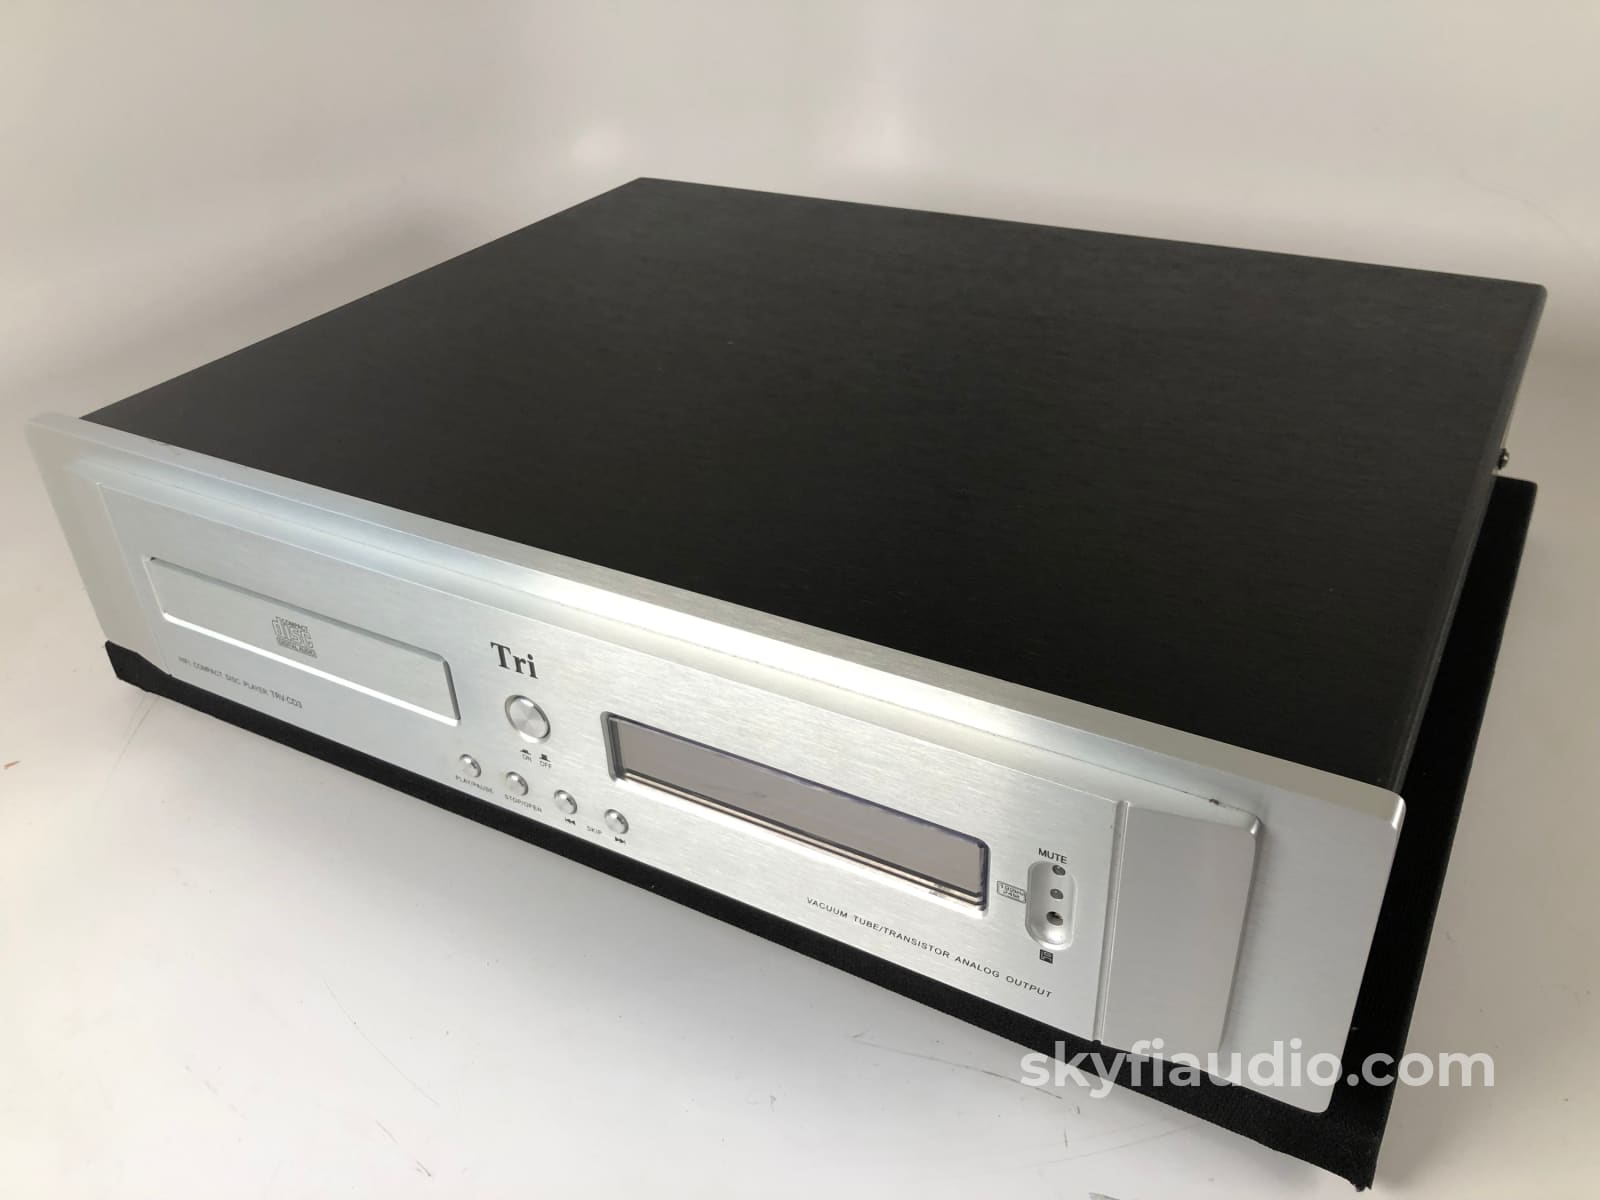 Triode Trv-Cd3 Cd Player - Your Choice Tubes Or Solid State! + Digital